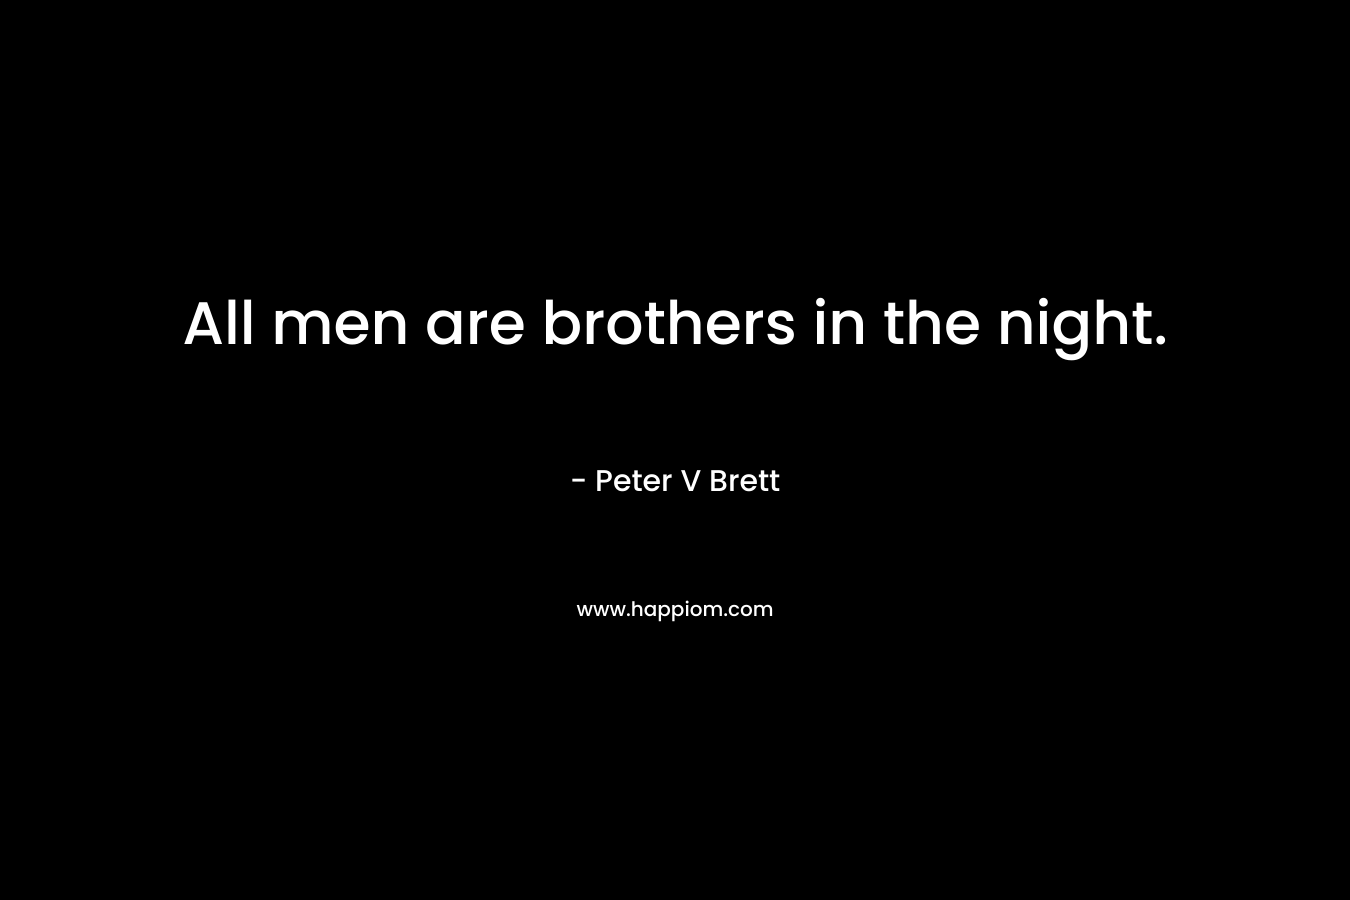 All men are brothers in the night.